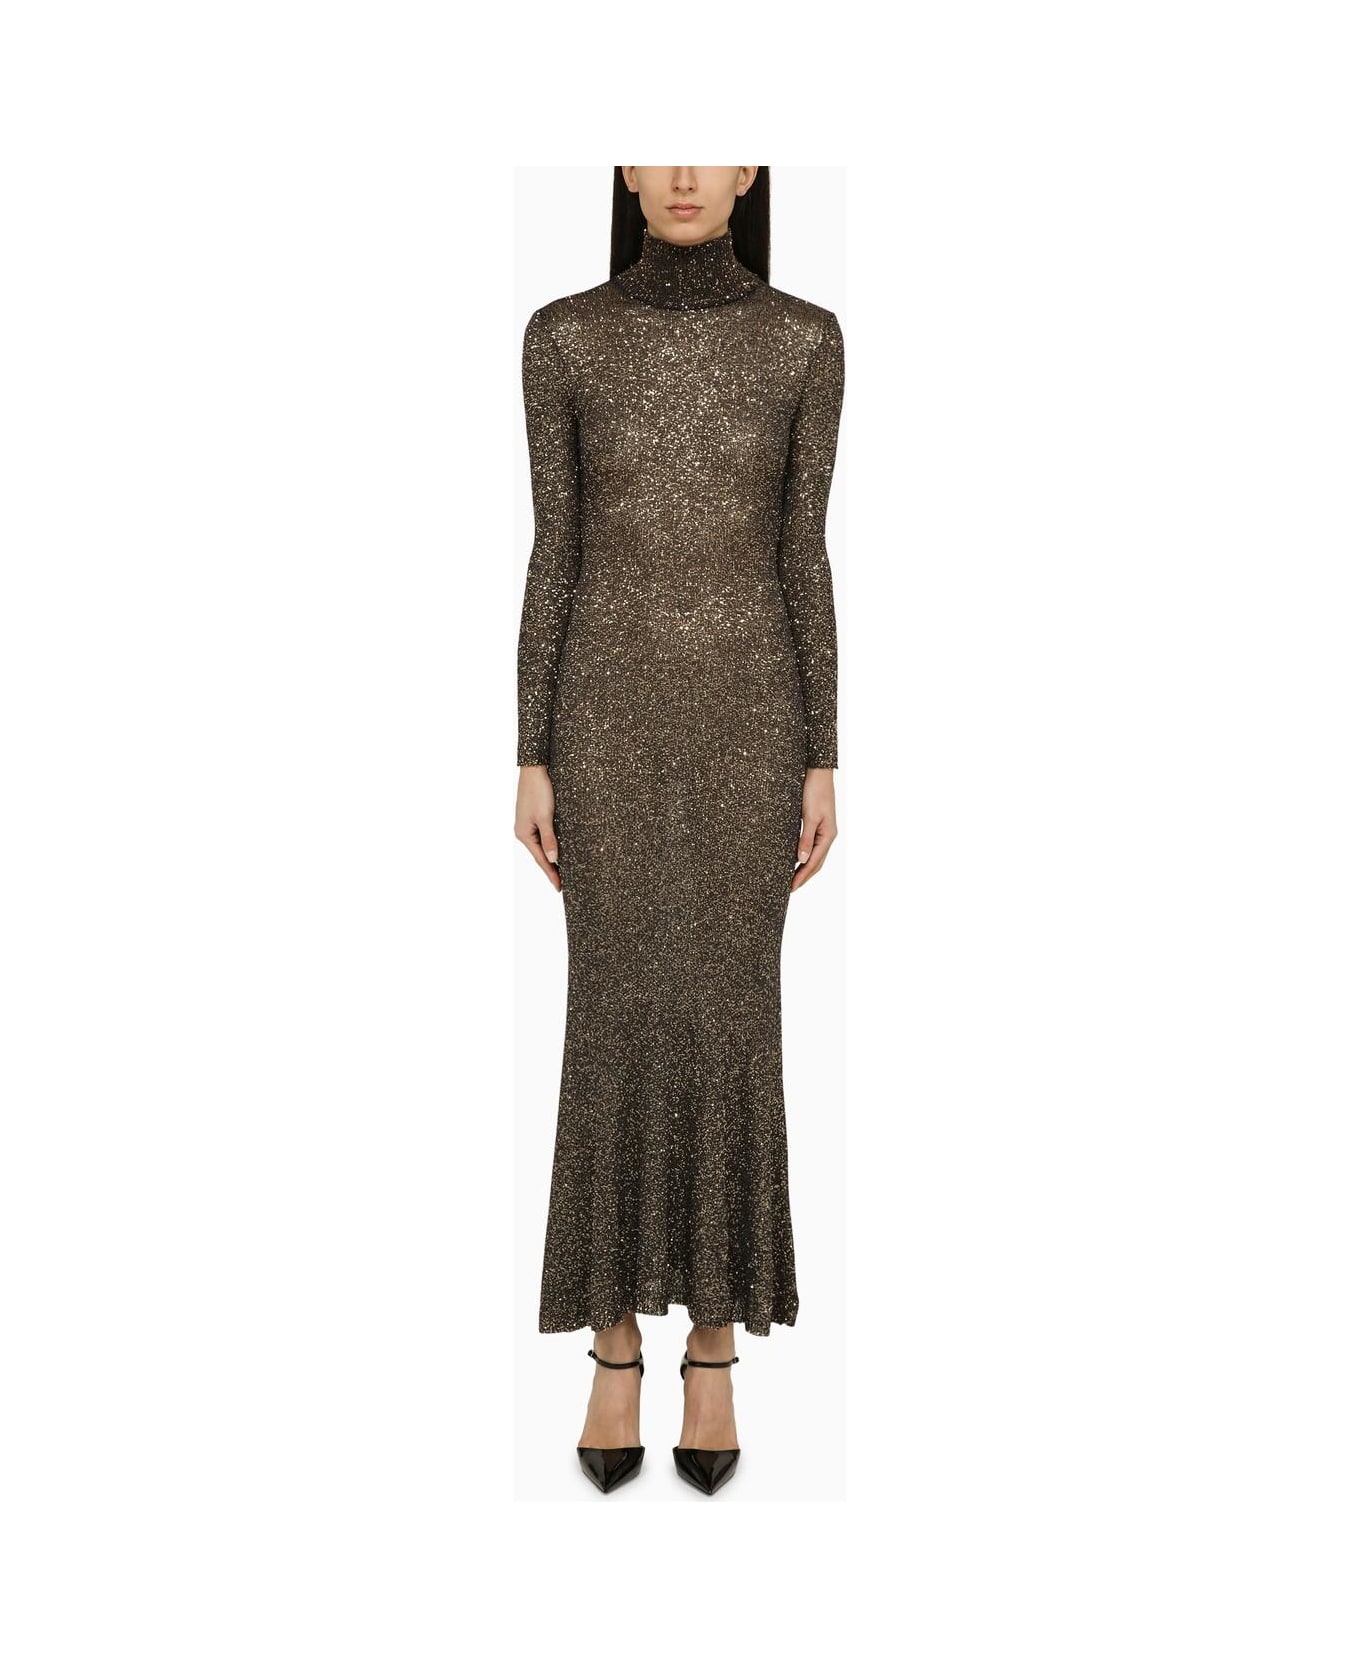 Balenciaga Brown And Gold Dress With Sequins - Brown/gold